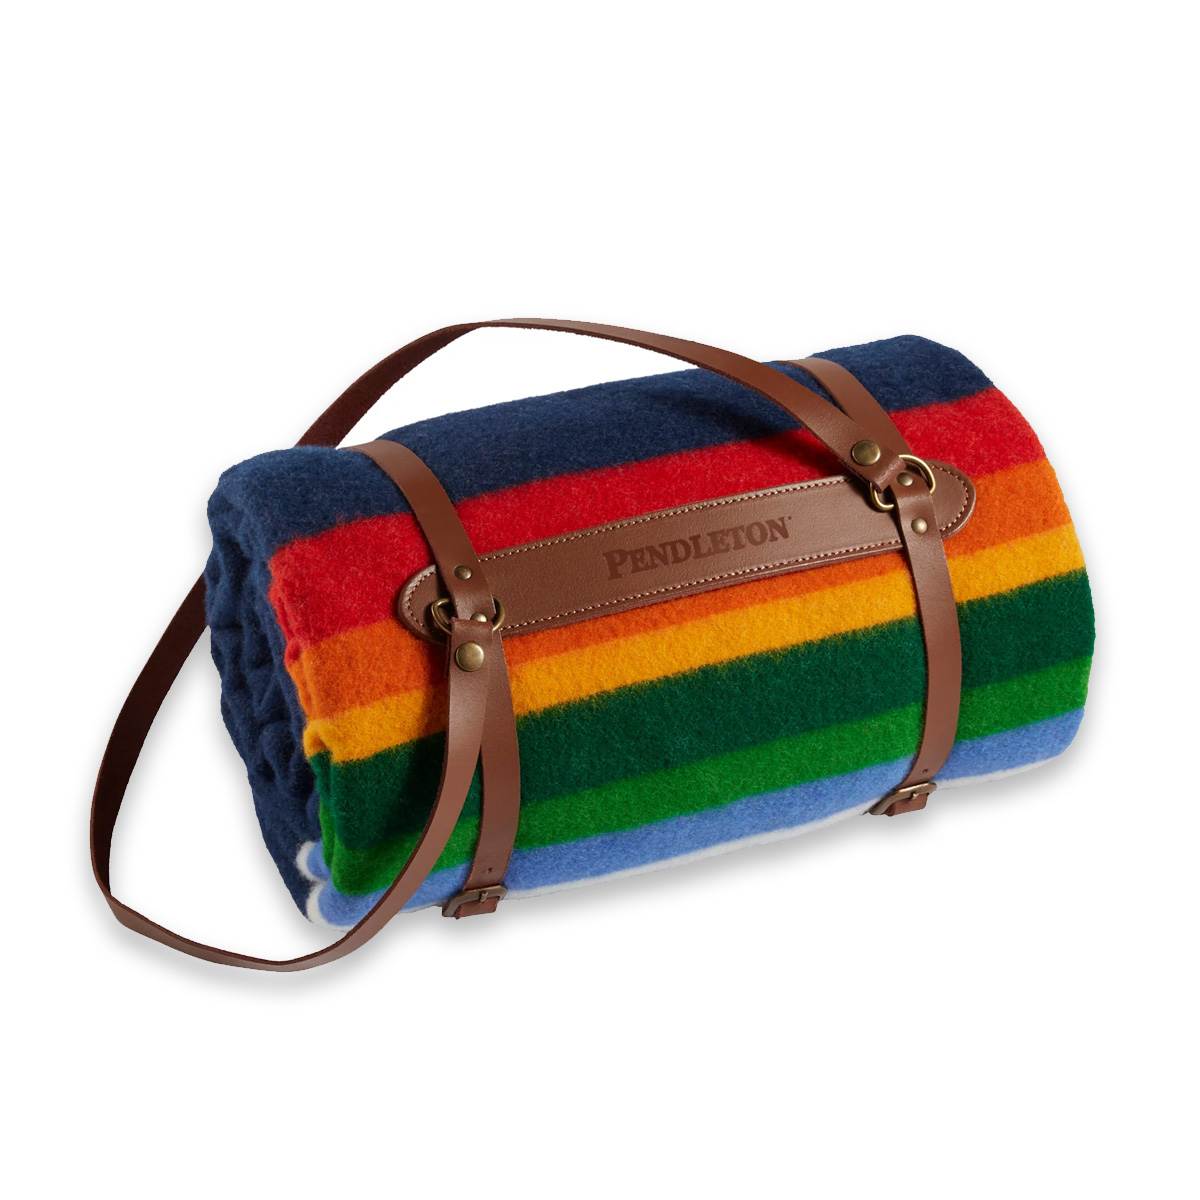 Pendleton National Park Throw With Carrier Crater Lake Navy, Includes leather carrier for easy portability.